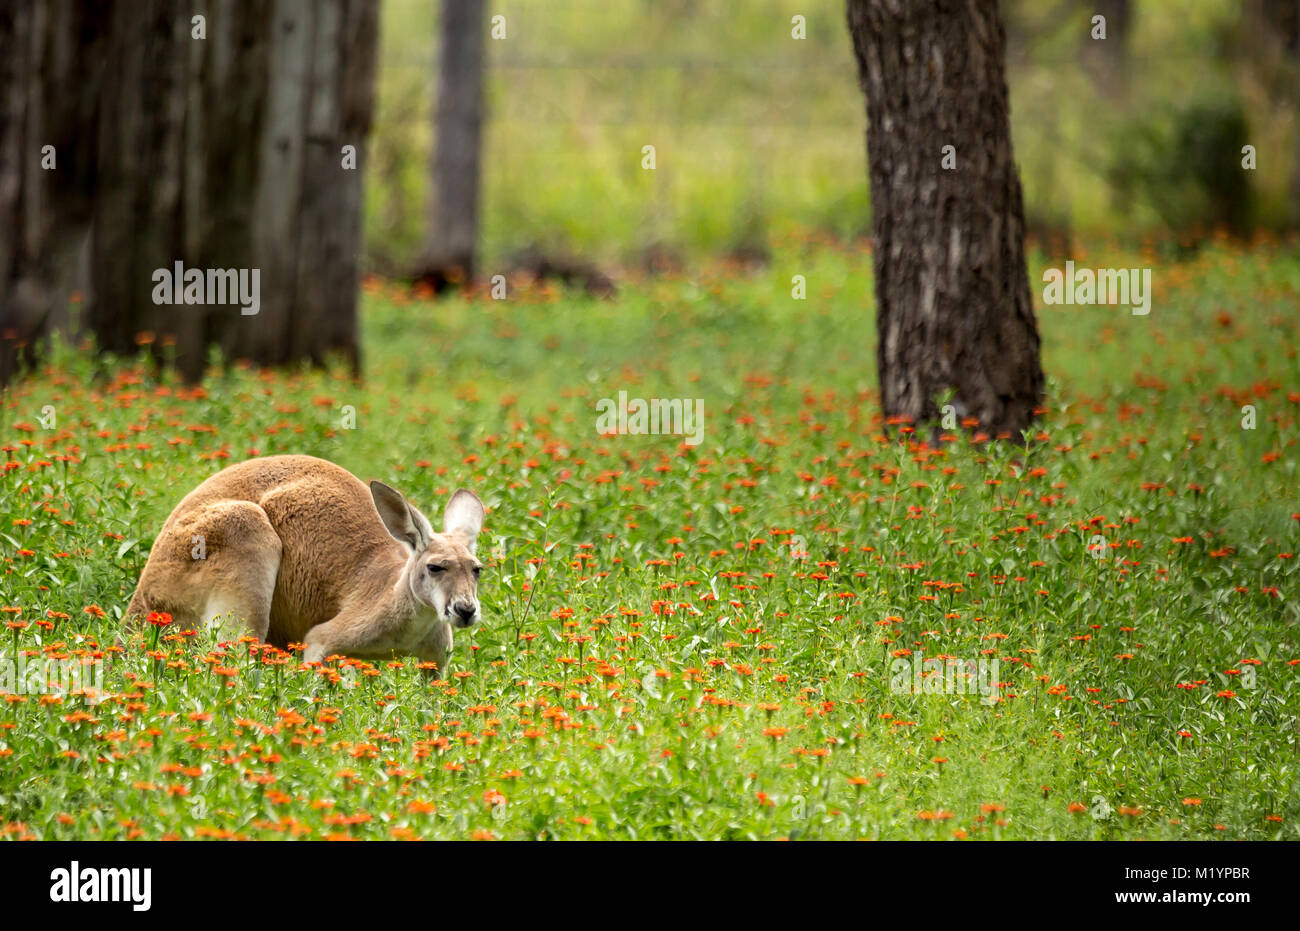 A kangaroo with black and white markings on its face - the trademark of a red kangaroo  (macropus rufus). It is crouched down amongst the wildflowers. Stock Photo